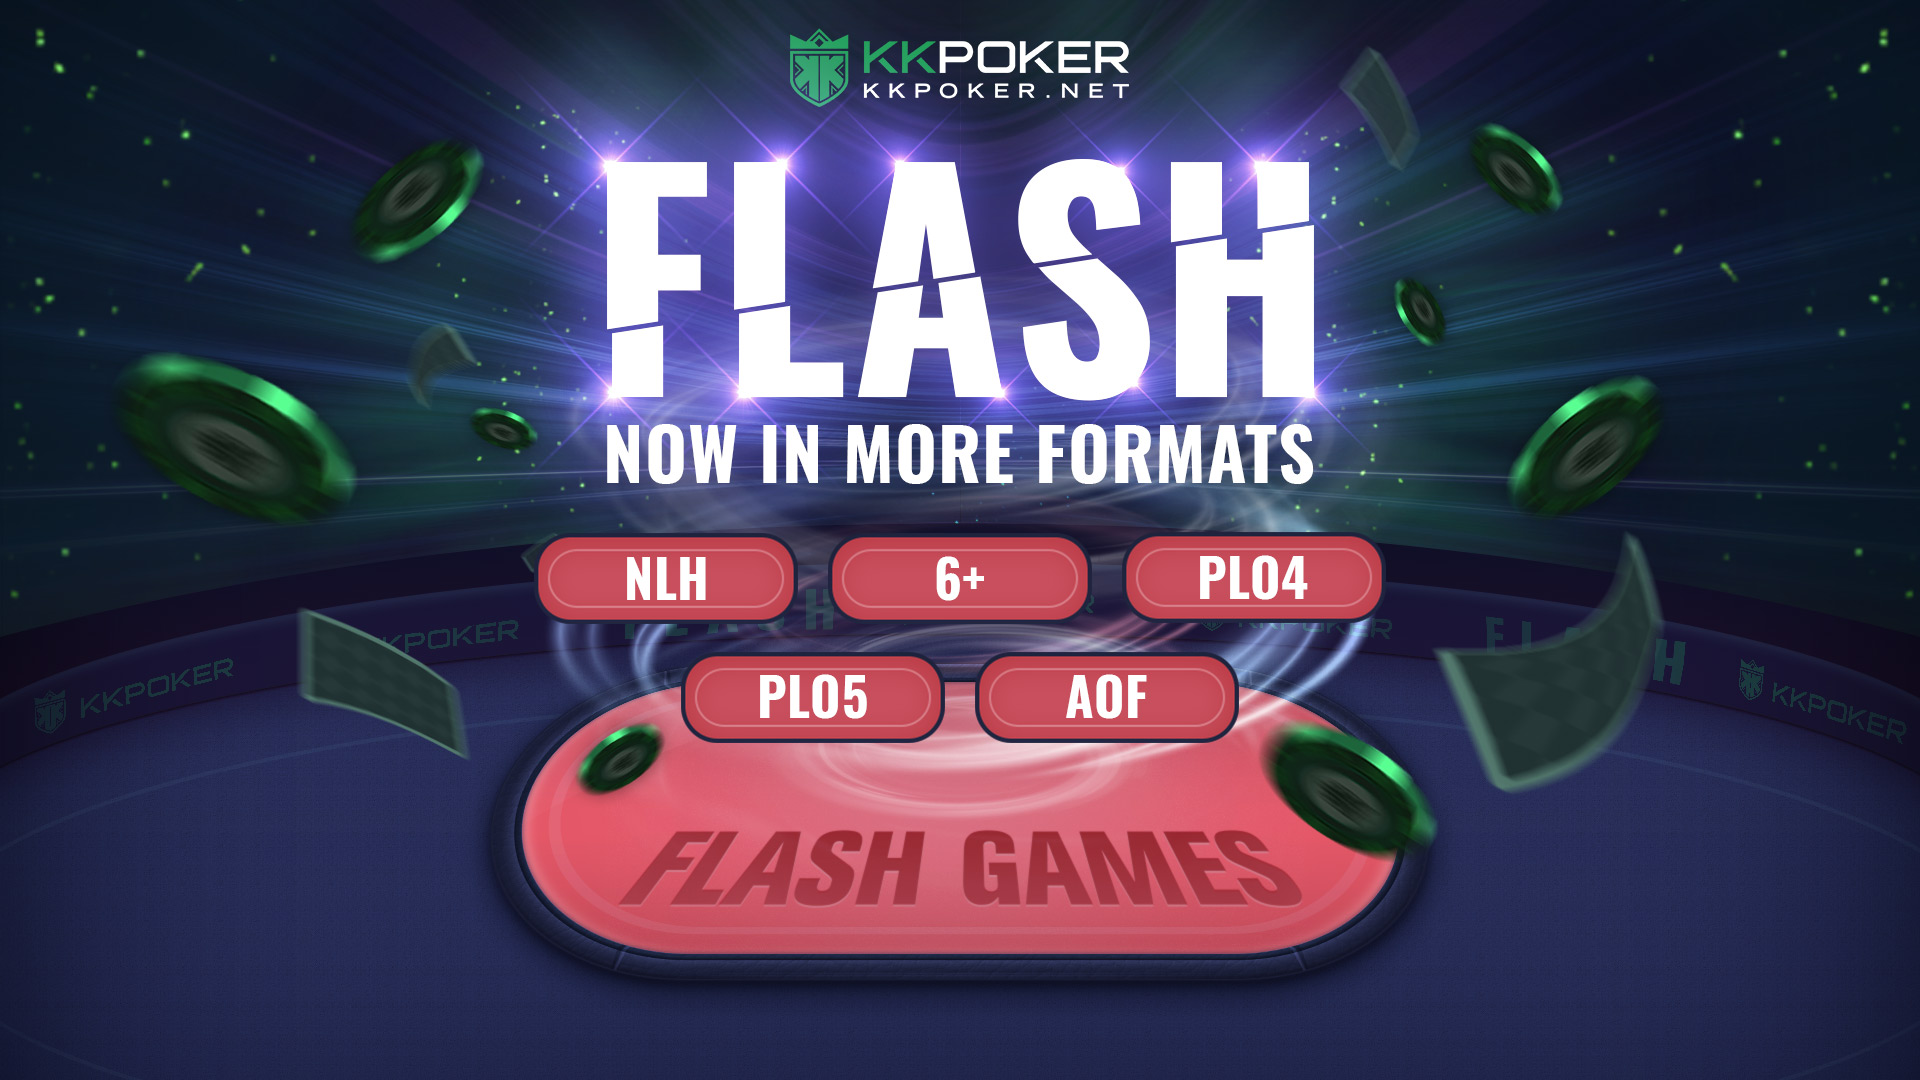 FLASH is KKPoker's fastest cash game poker format and allows you to pl...